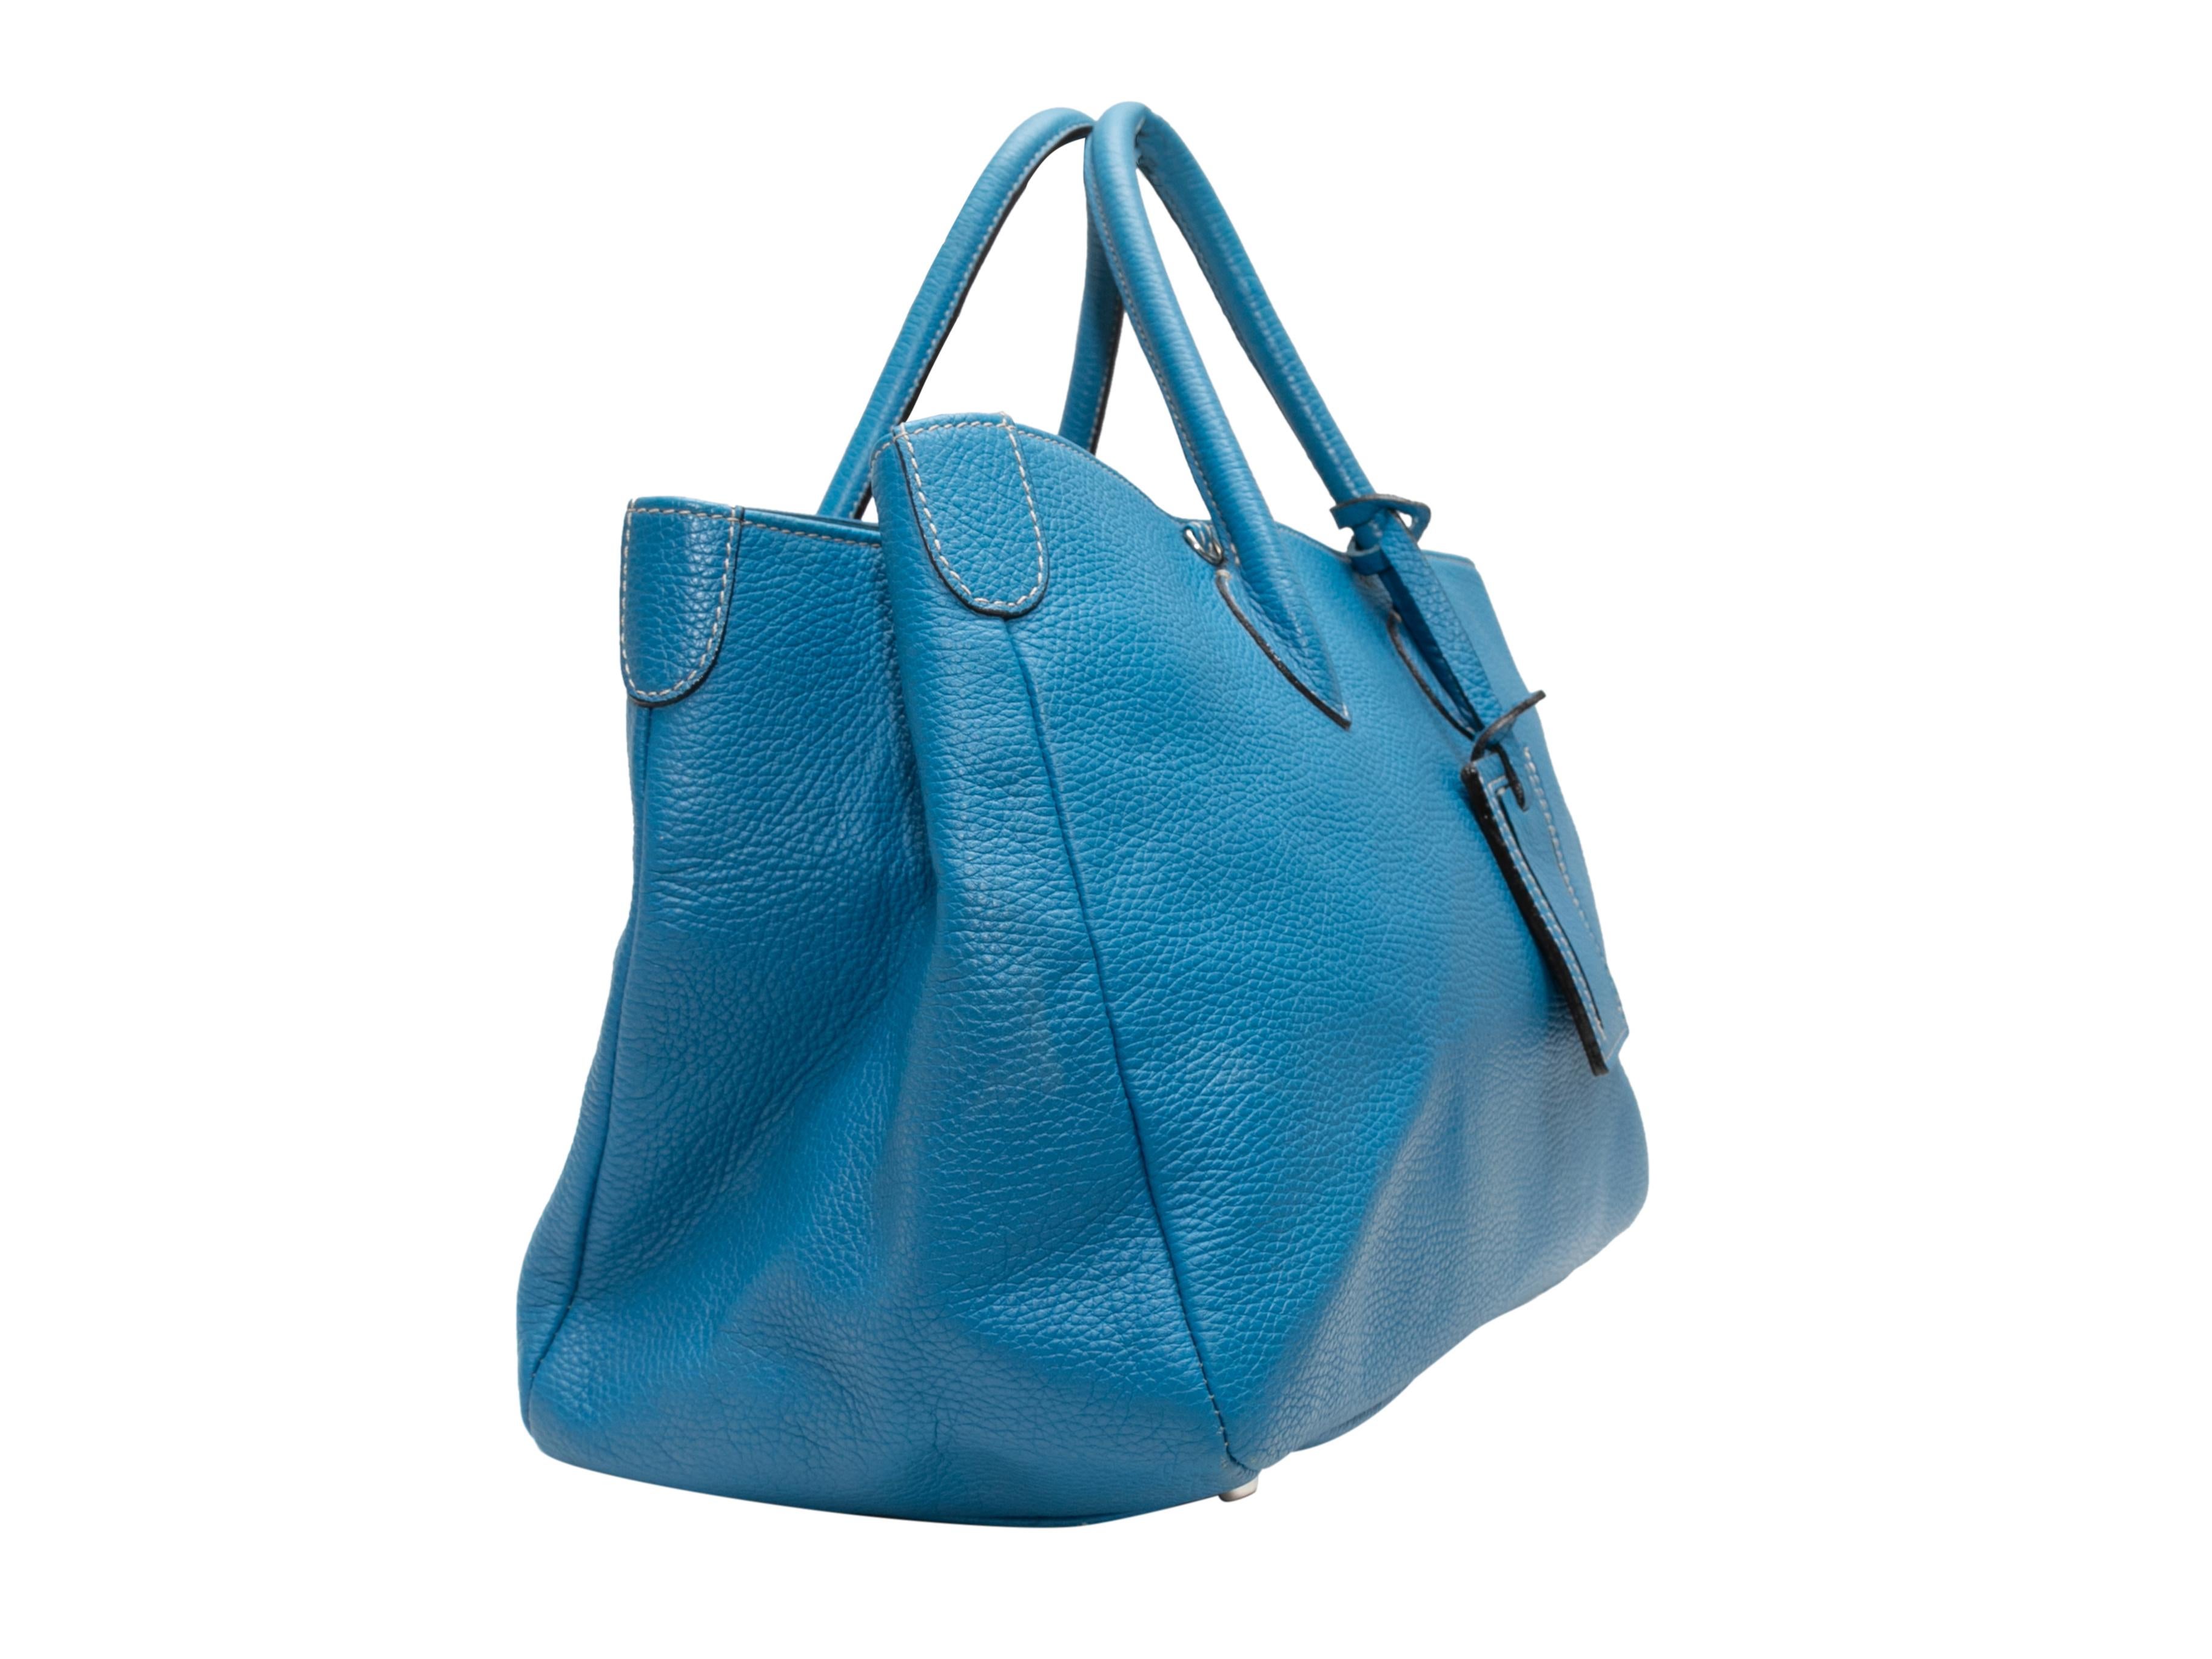 Blue Suarez Leather Crossbody Tote Bag. This crossbody tote bag features a leather body, silver-tone hardware, dual rolled top handles, and a flat beige crossbody strap. 14